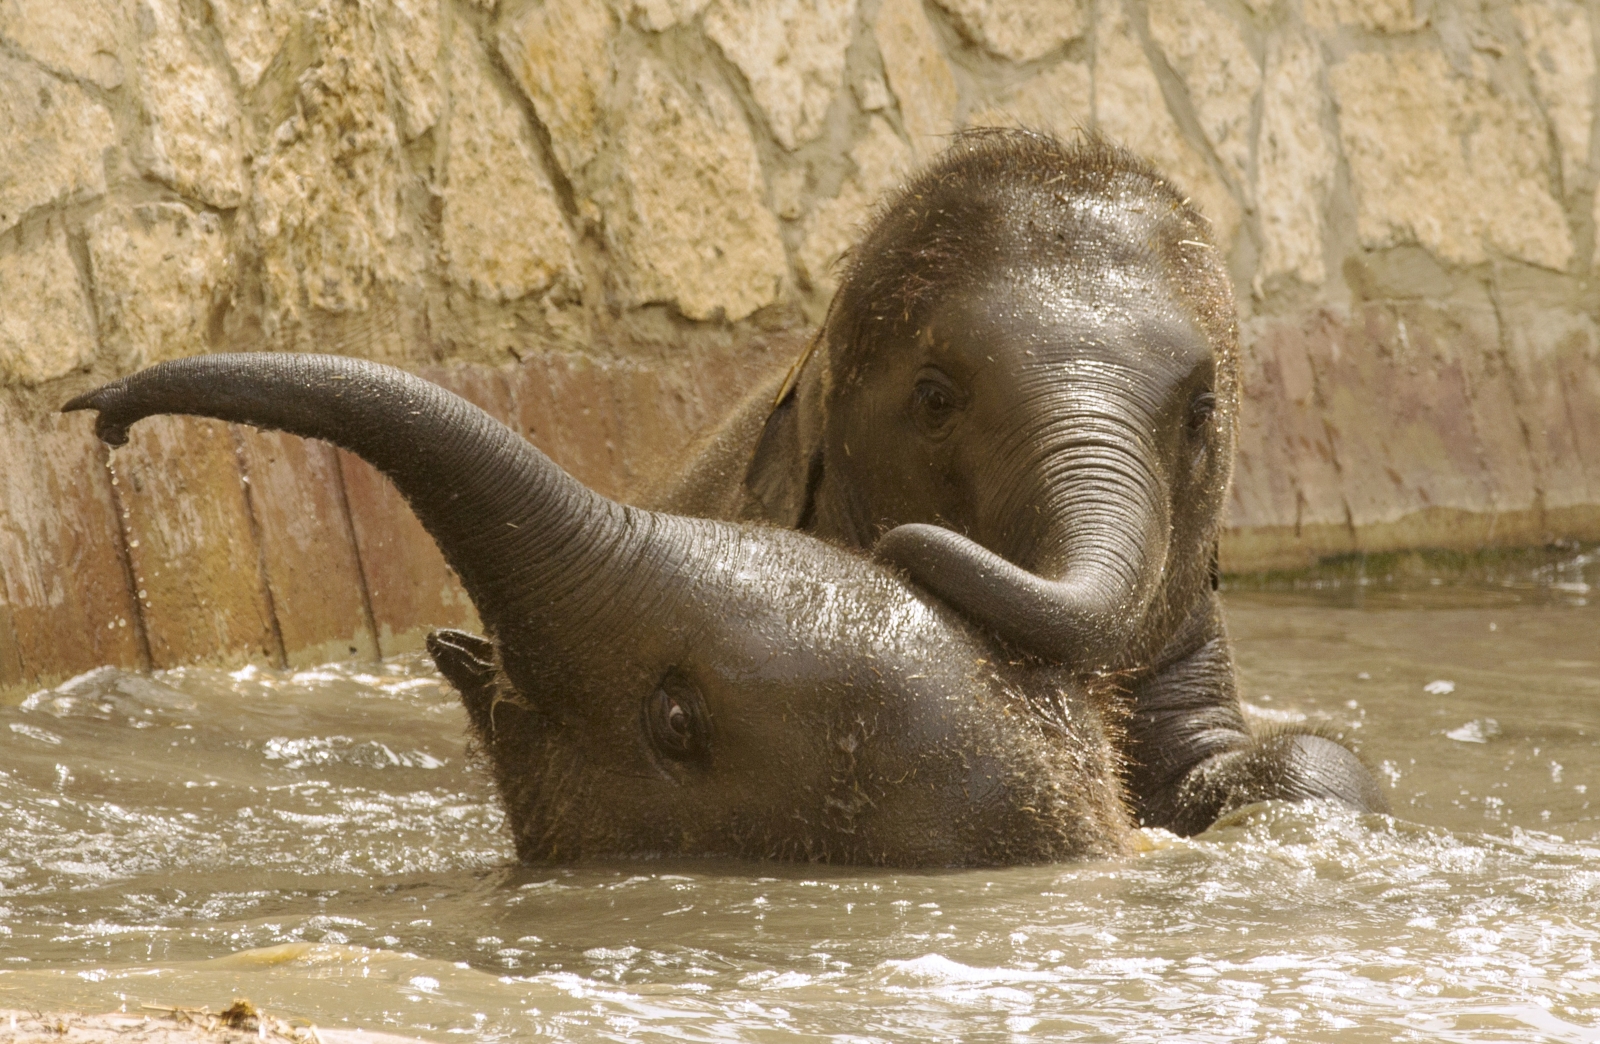 Baby elephants cool off playing in pool